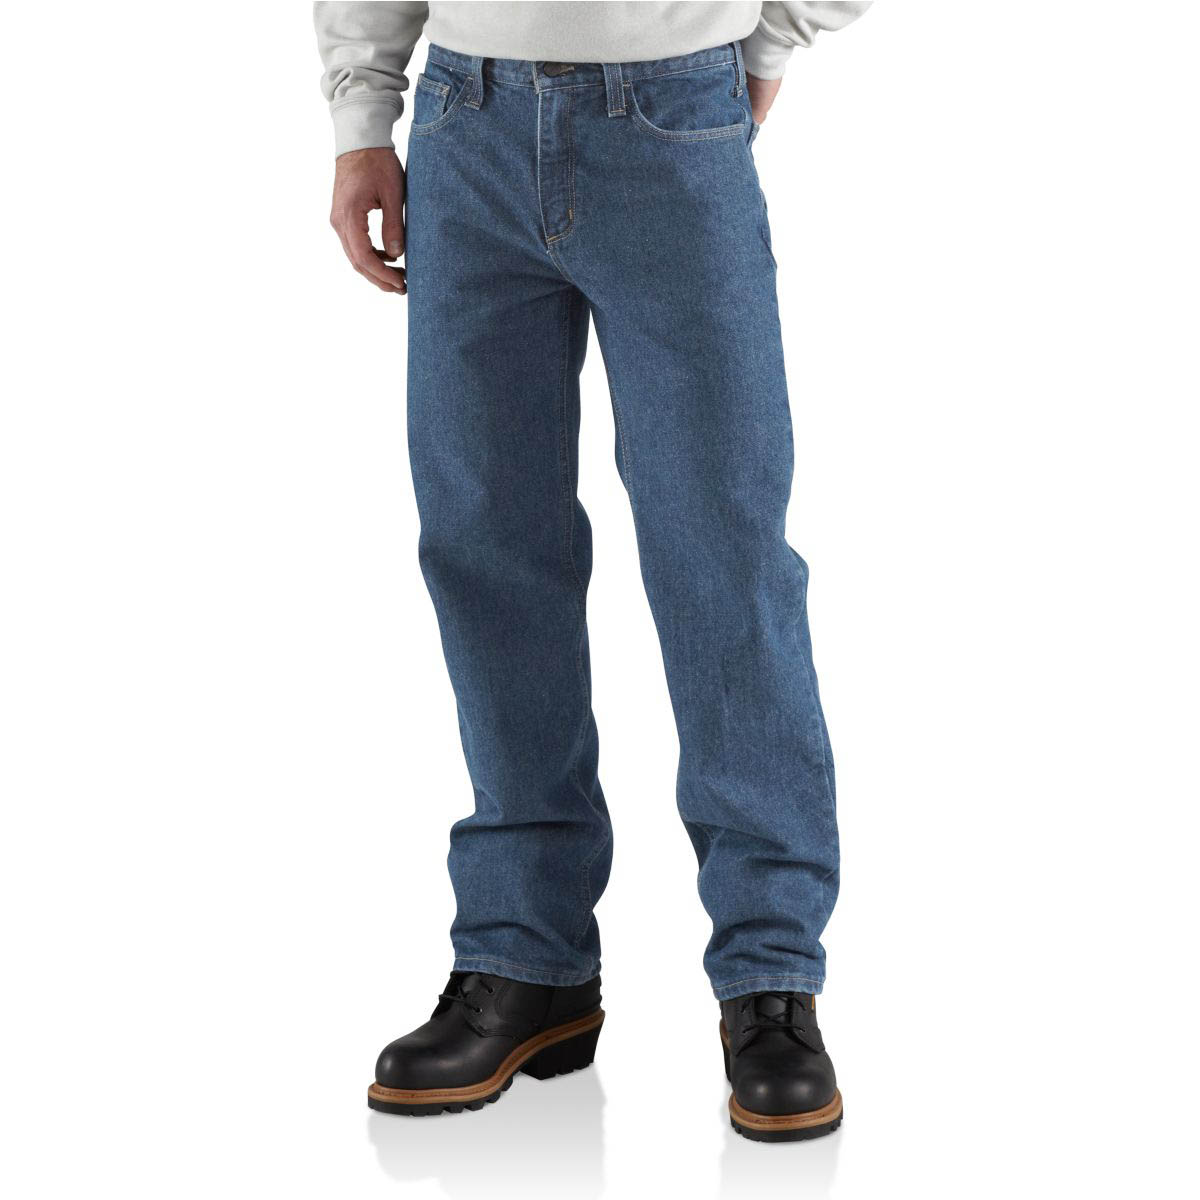 Carhartt Mens Flame Resistant Utility Jean Relaxed Fit